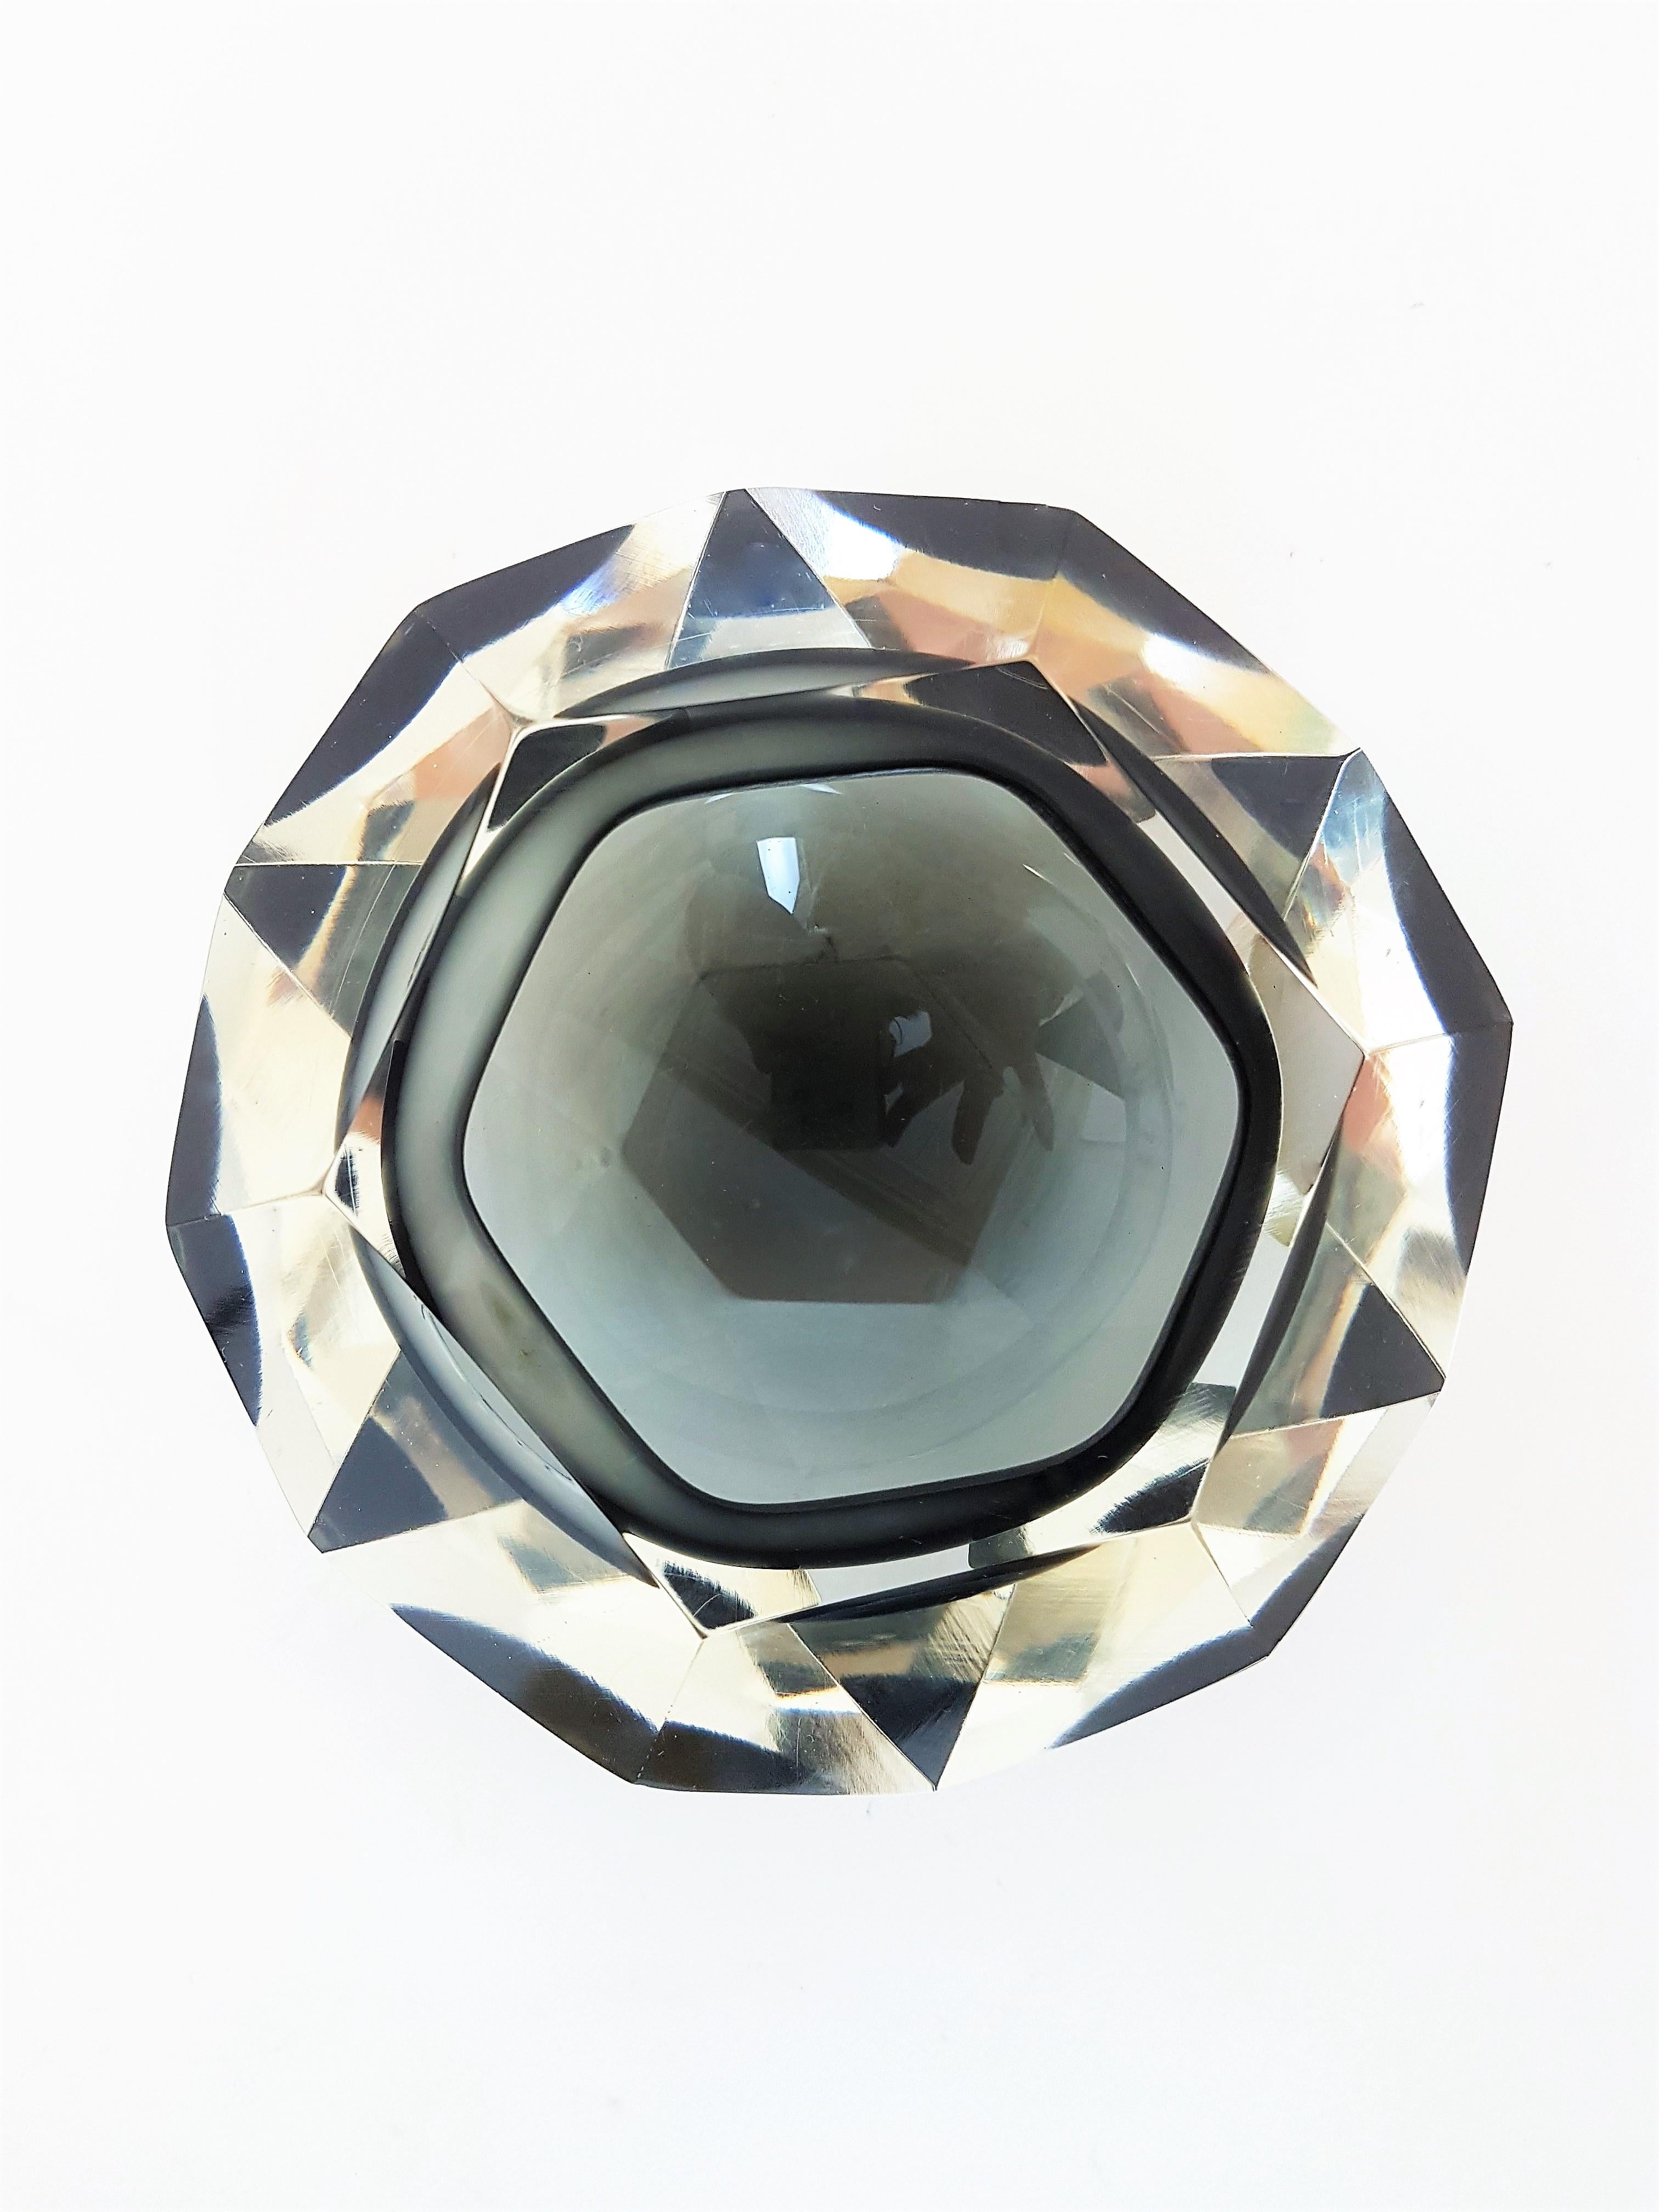 Flavio Poli Sommerso Smoked Grey & Clear Faceted Diamond Shape Murano Glass Bowl 2